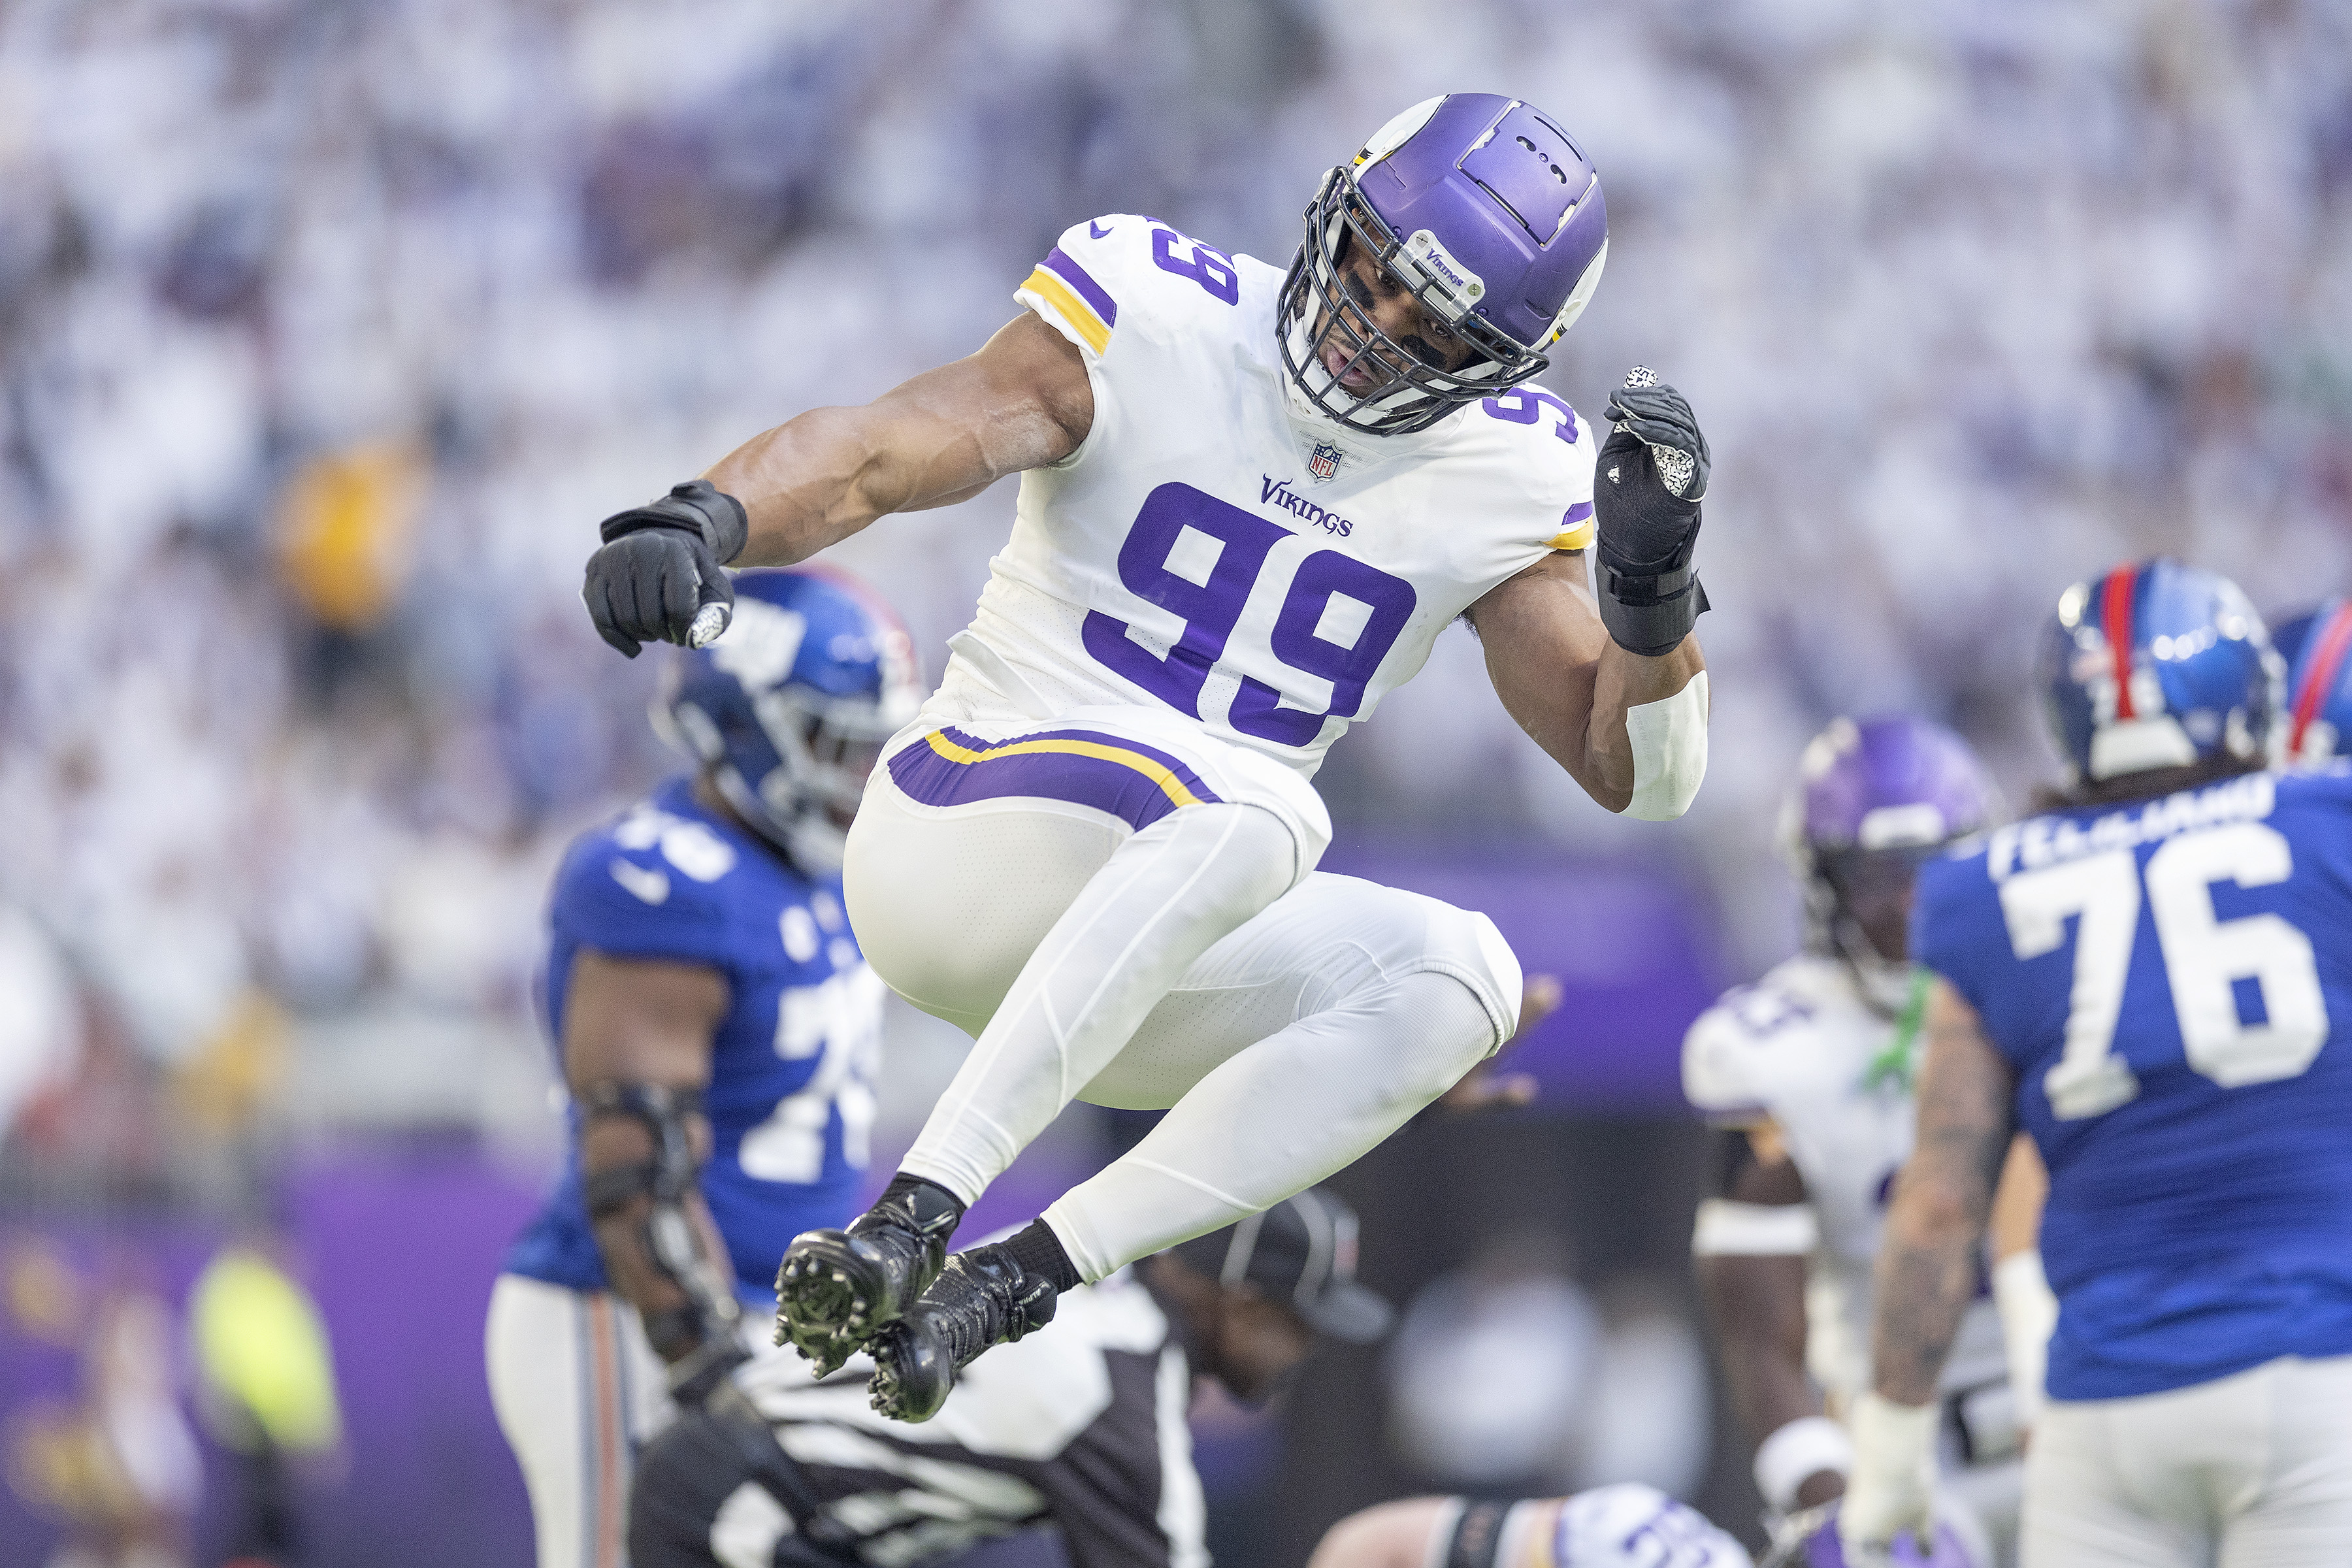 Vikings-Giants recap: Game balls, numbers to know, and what's next